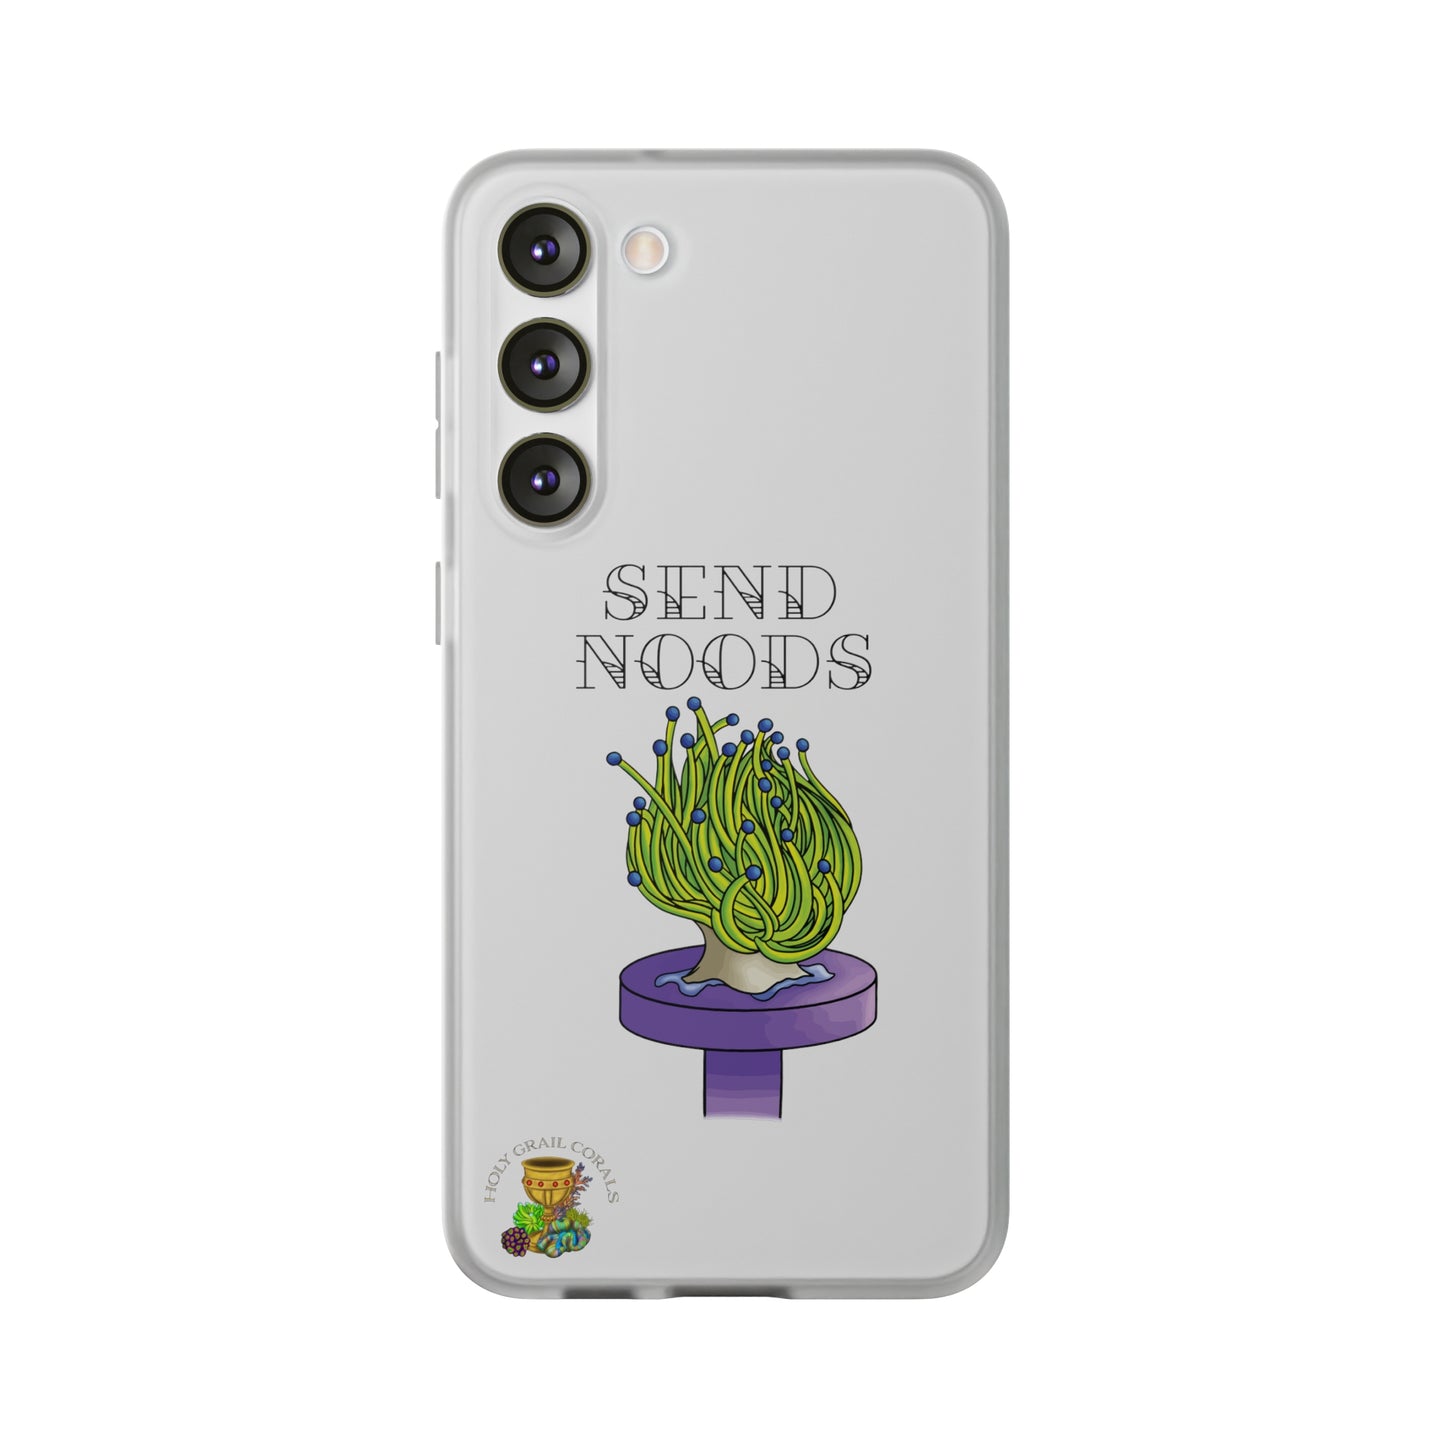 "Send Noods" Torch Coral Cell Phone Flexi Case